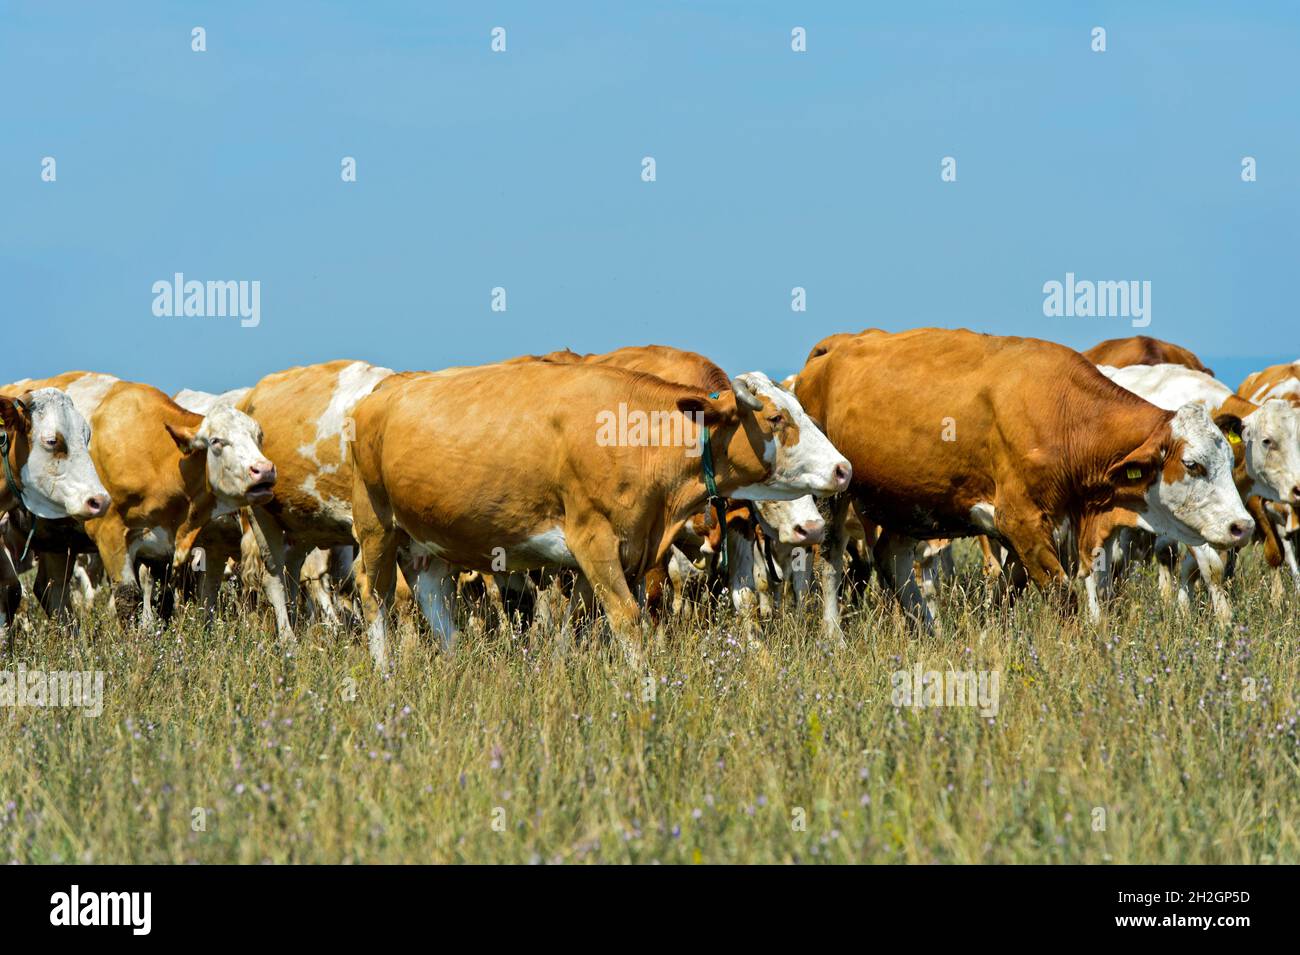 Herd of Simmental cattle on a pasture in the Langen Lacke conservation zone, Neusiedlersee – Seewinkel National Park, Apetlon, Burgenland, Austria Stock Photo